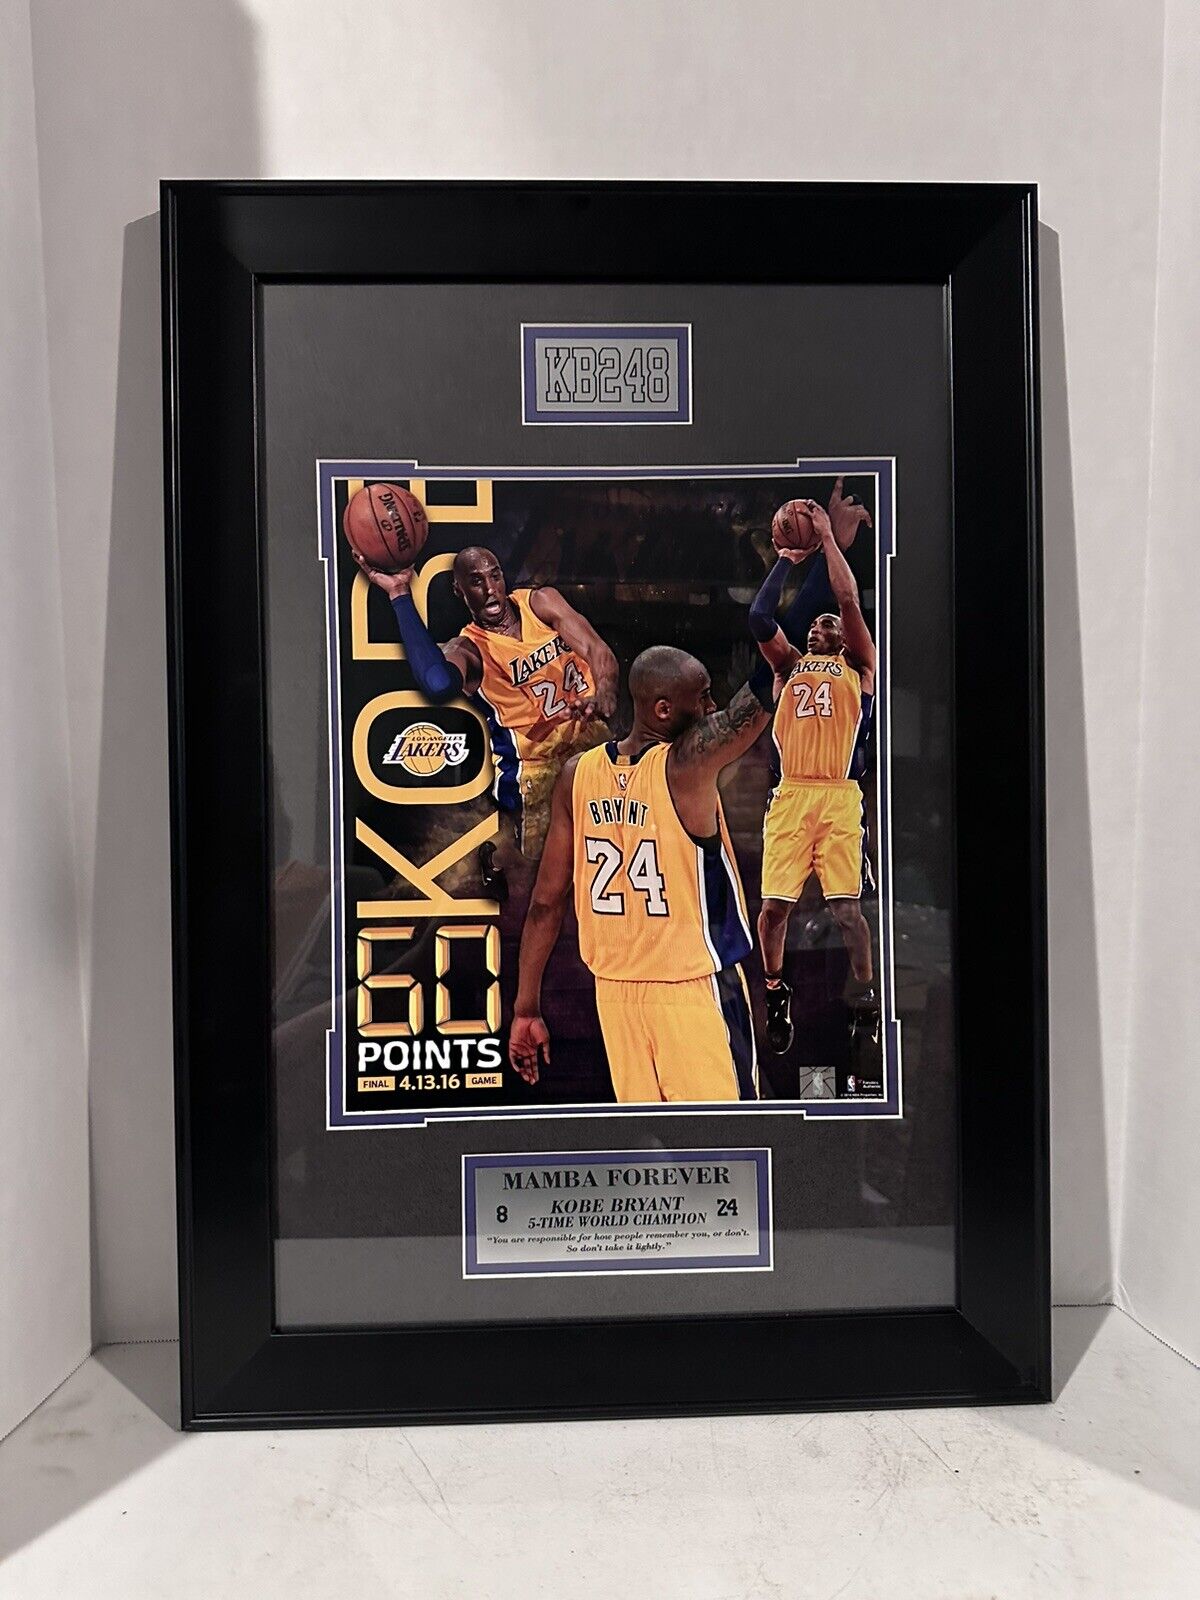 Kobe Bryant One Of A Kind Lot Collectibles You Don’t Want To Miss This